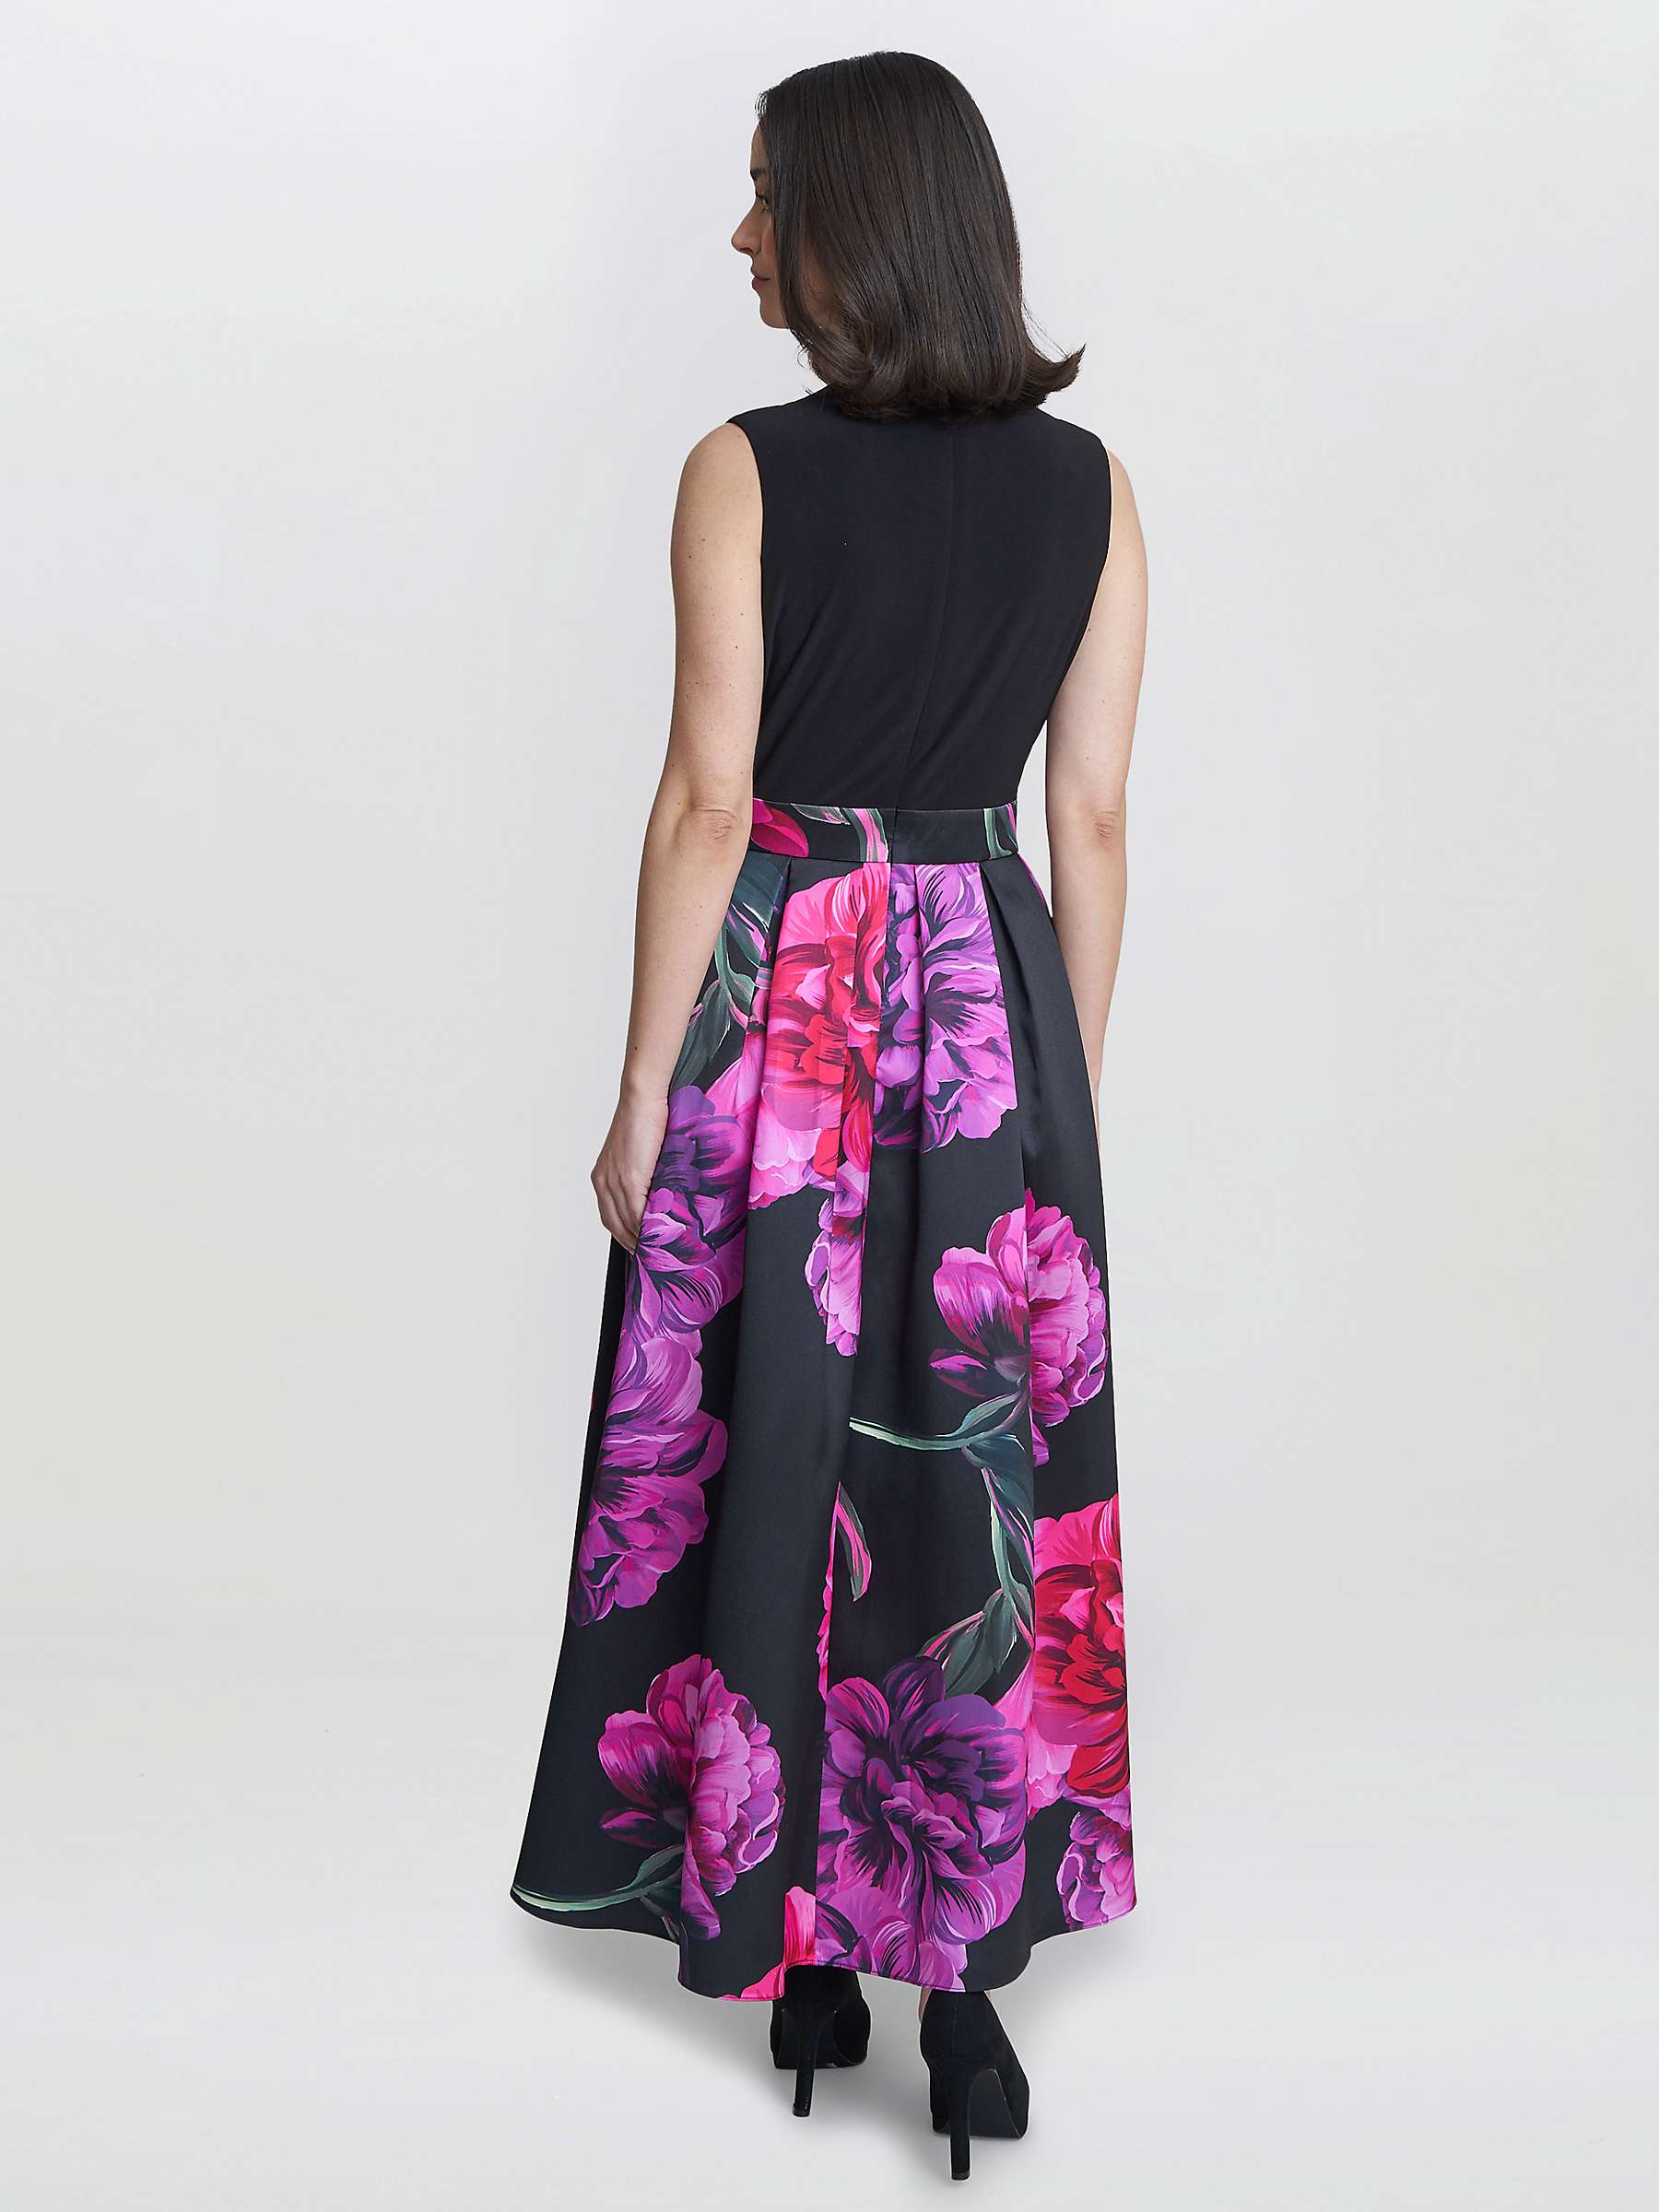 Buy Gina Bacconi  Annabelle Printed High Low Dress, Black/Multi Online at johnlewis.com